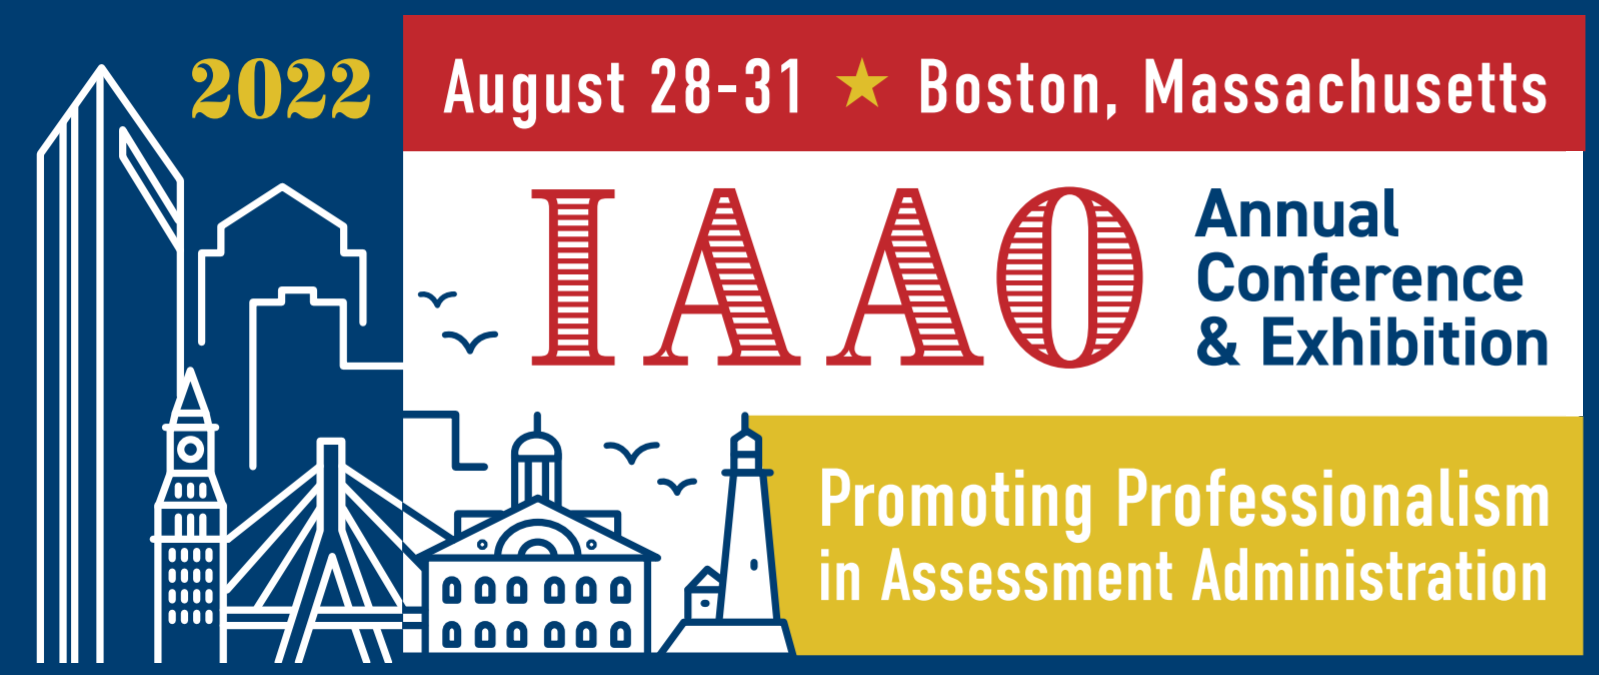 IAAO Annual Conference 2022